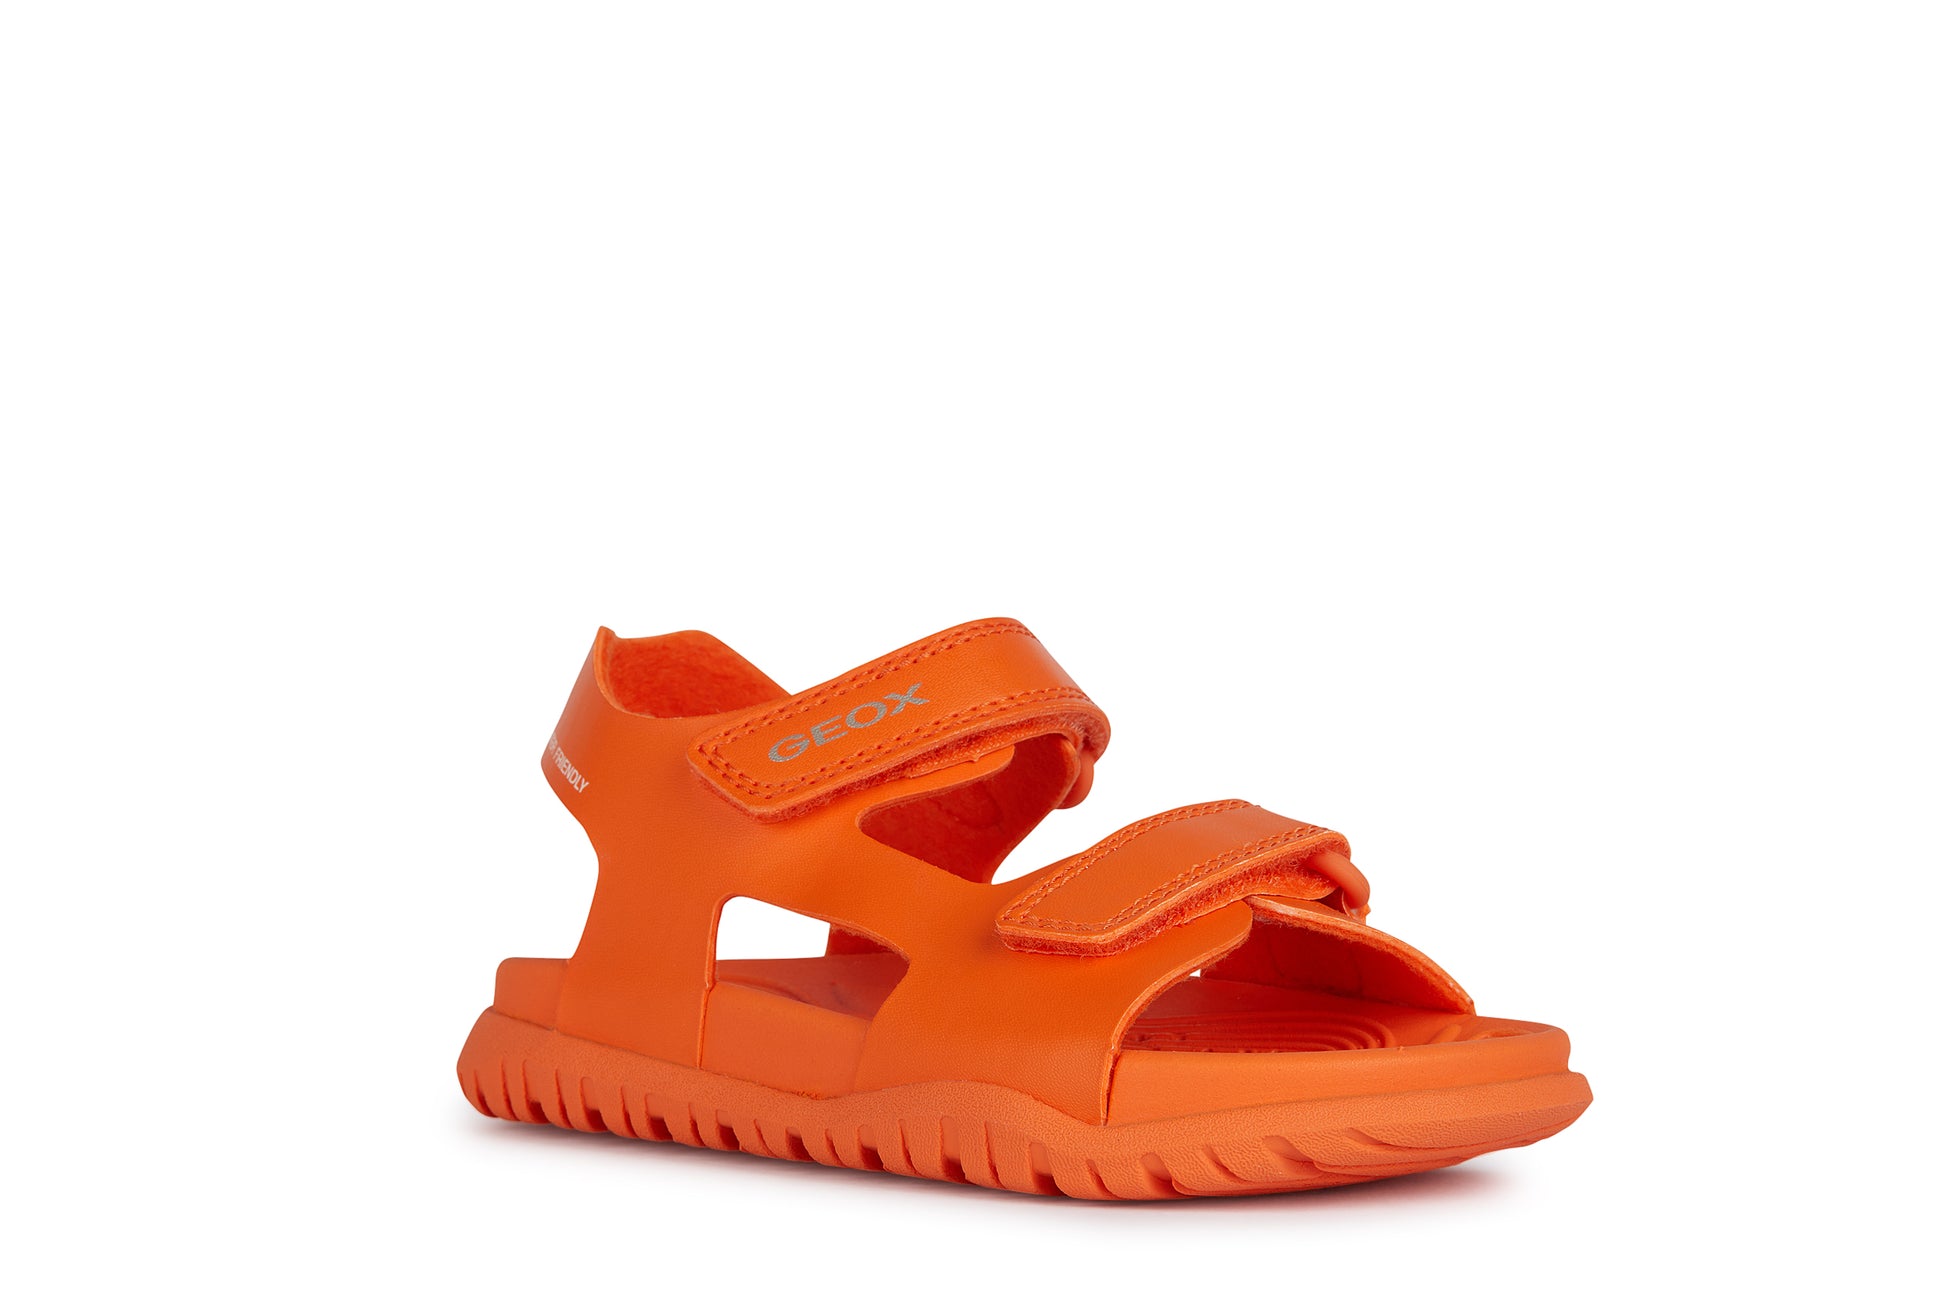 A unisex open toe synthetic water friendly sandal by Geox. Style Fusbetto in orange with two velcro fastenings. Right side angled view.